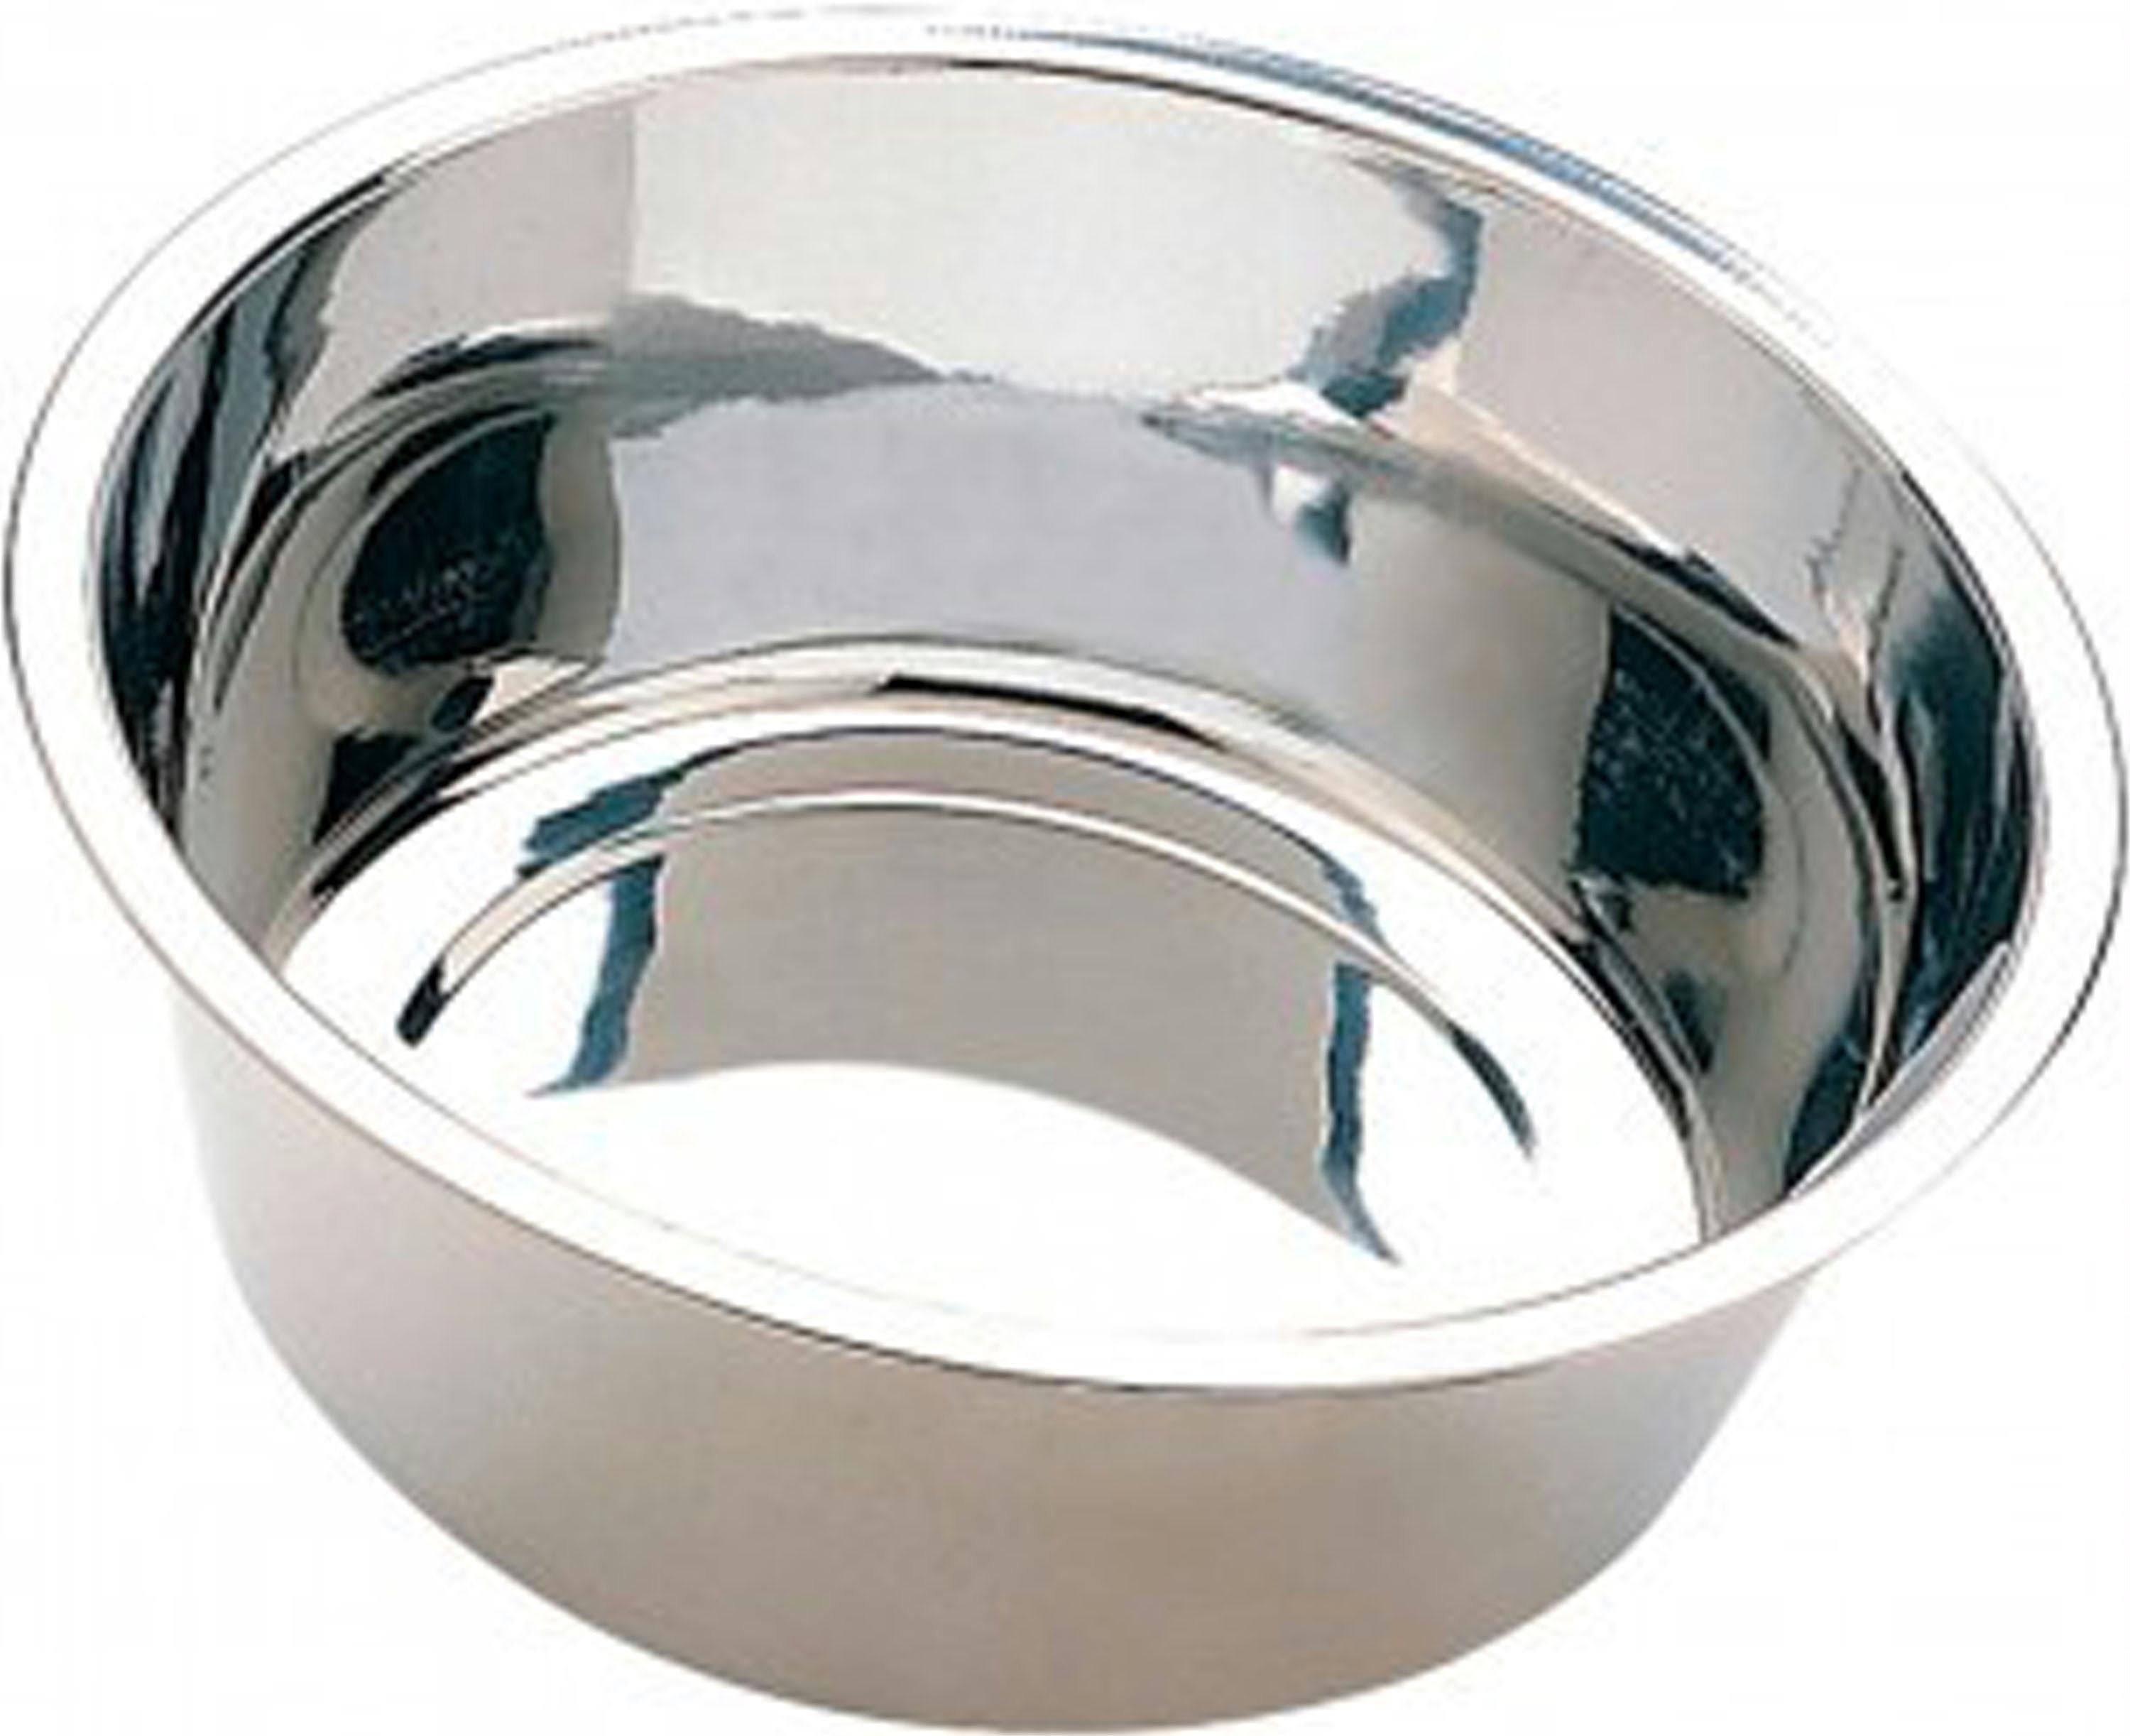 Ethical Pet Spot Pet Bowl - Stainless Mirror Finish